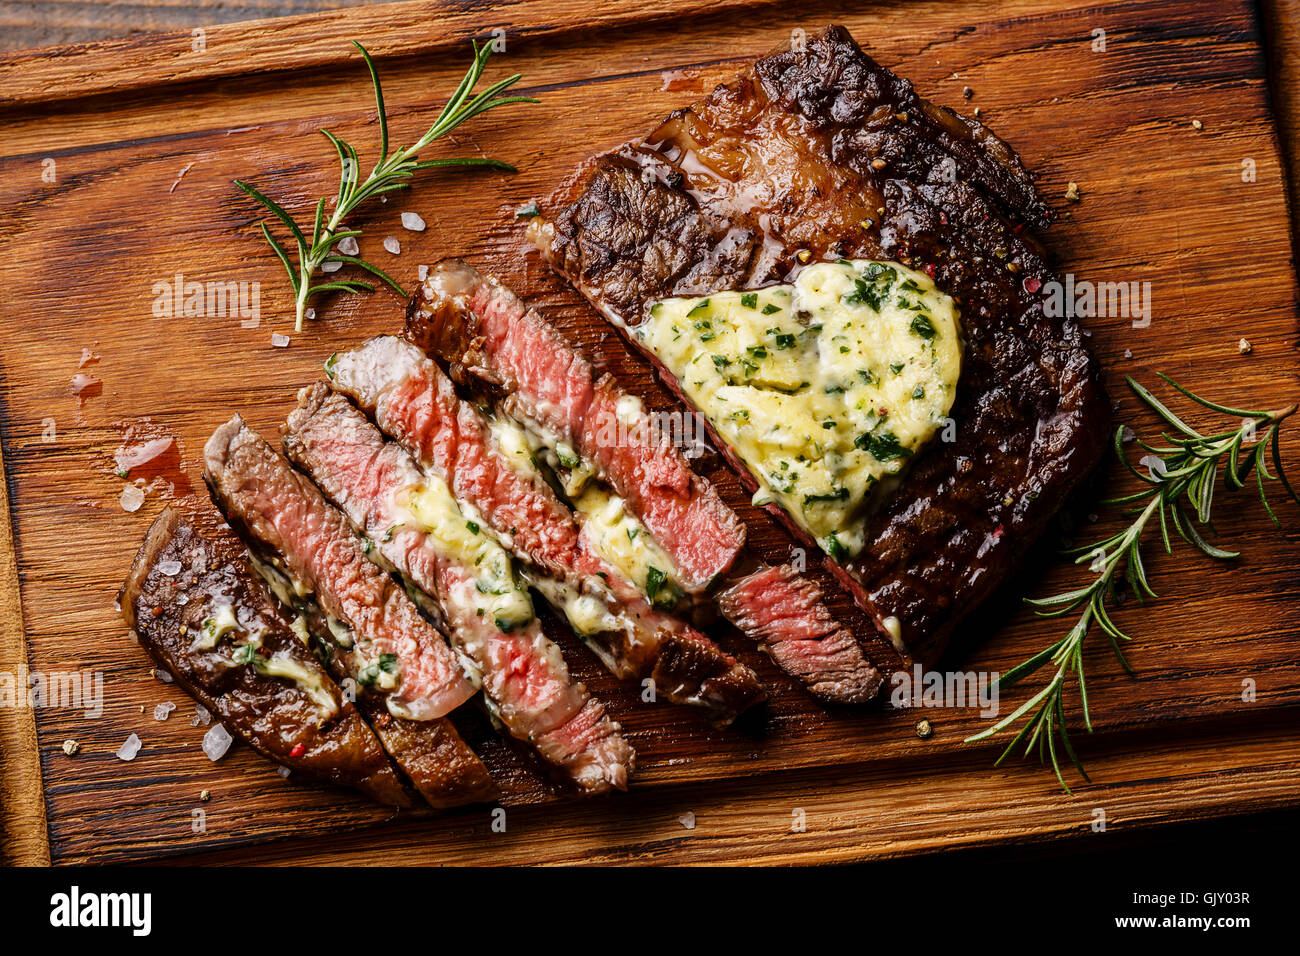 Sliced grilled Medium rare barbecue steak Ribeye with herb butter on cutting board close up Stock Photo